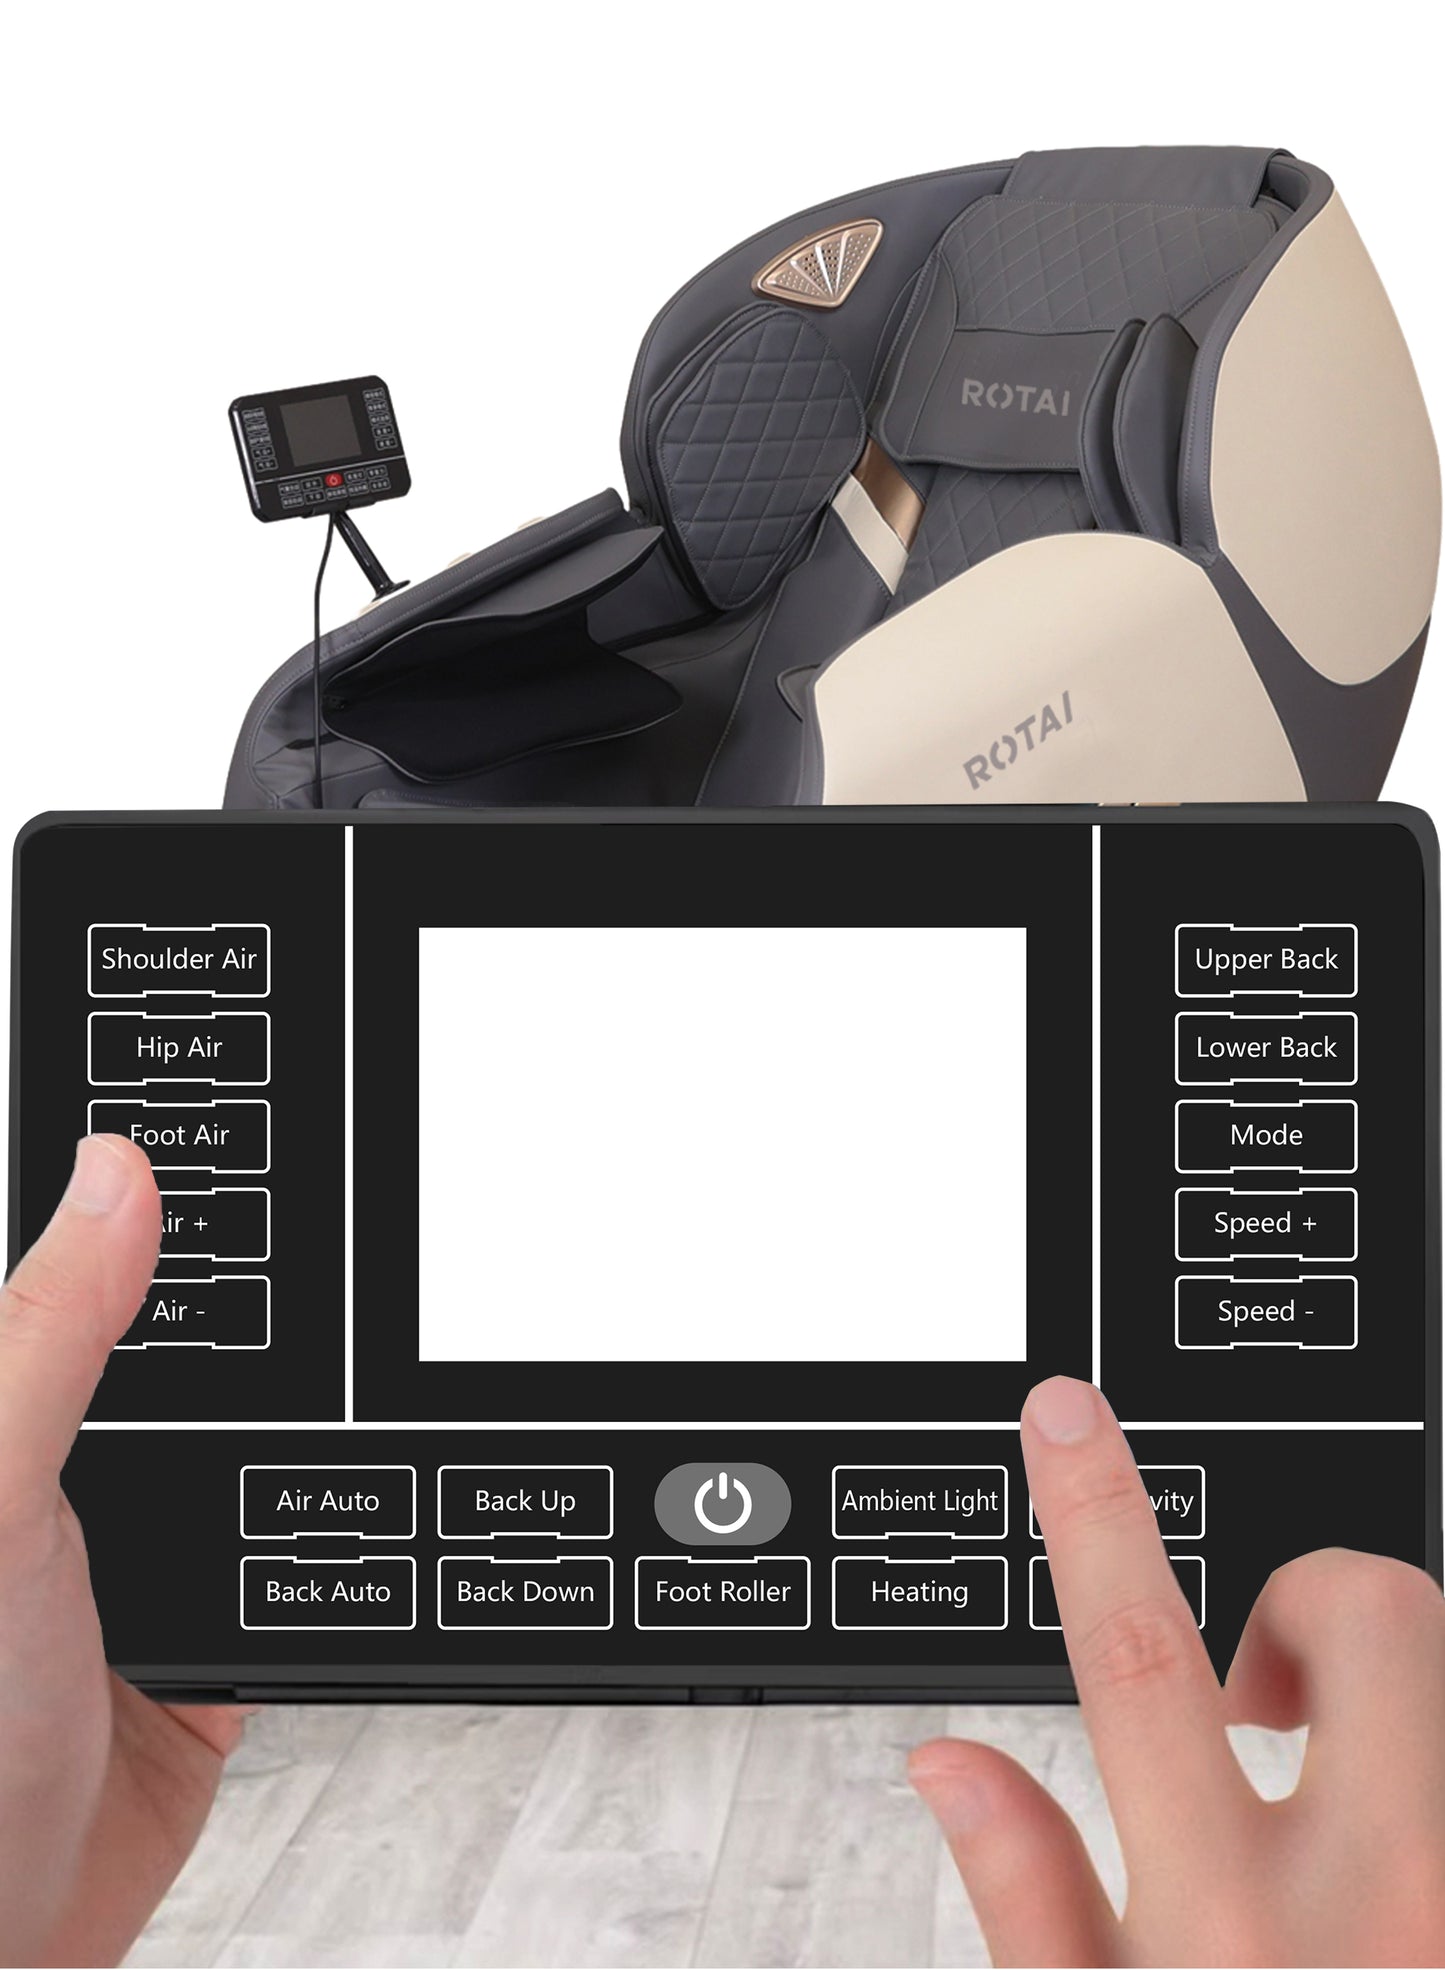 Hoyogen's Force Multi function 4D Massage Chair with 5 year Warranty